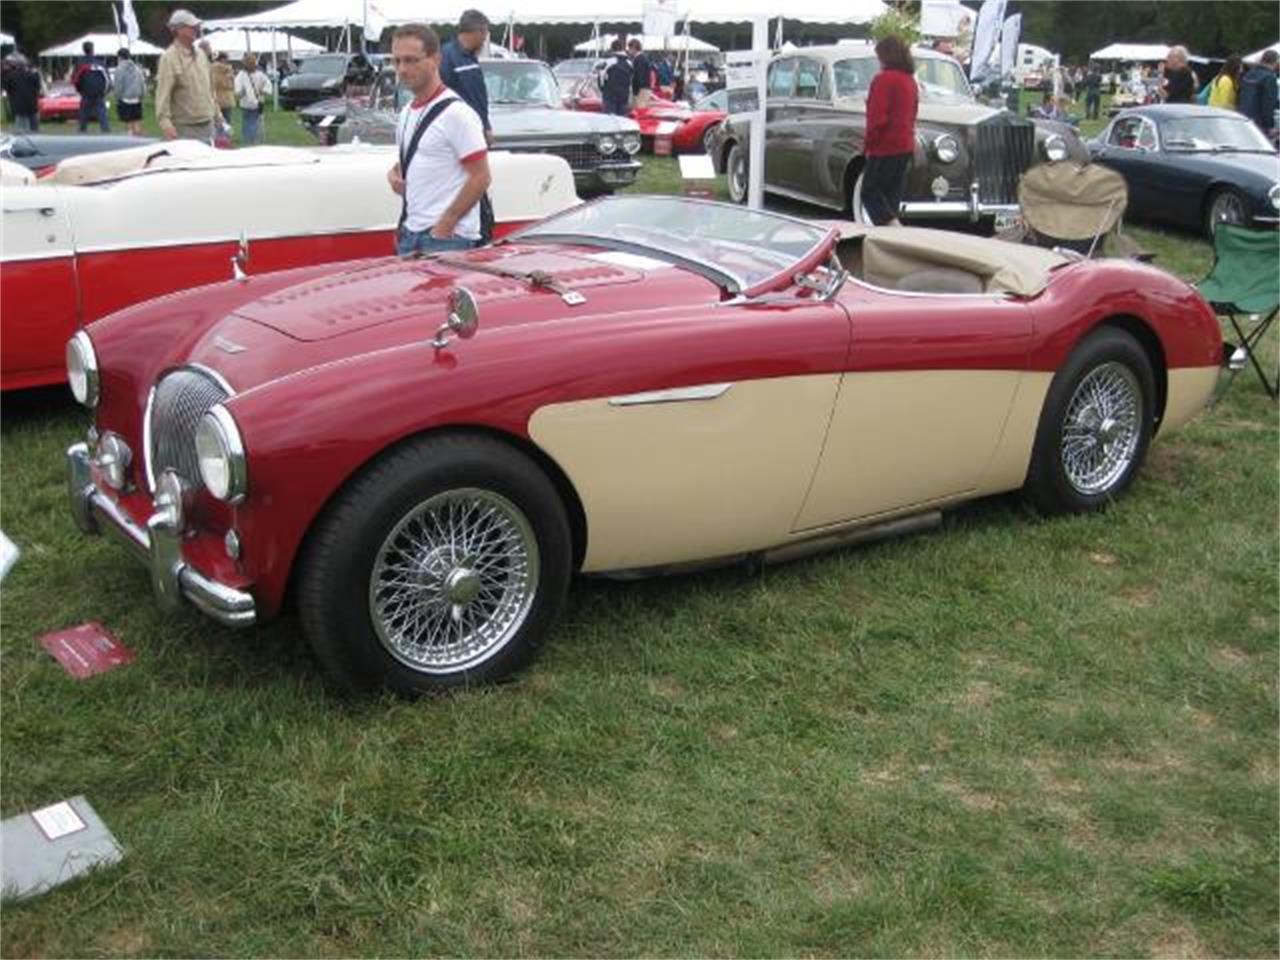 1956 Austin-Healey 100M for sale in Stratford, CT - photo 4.